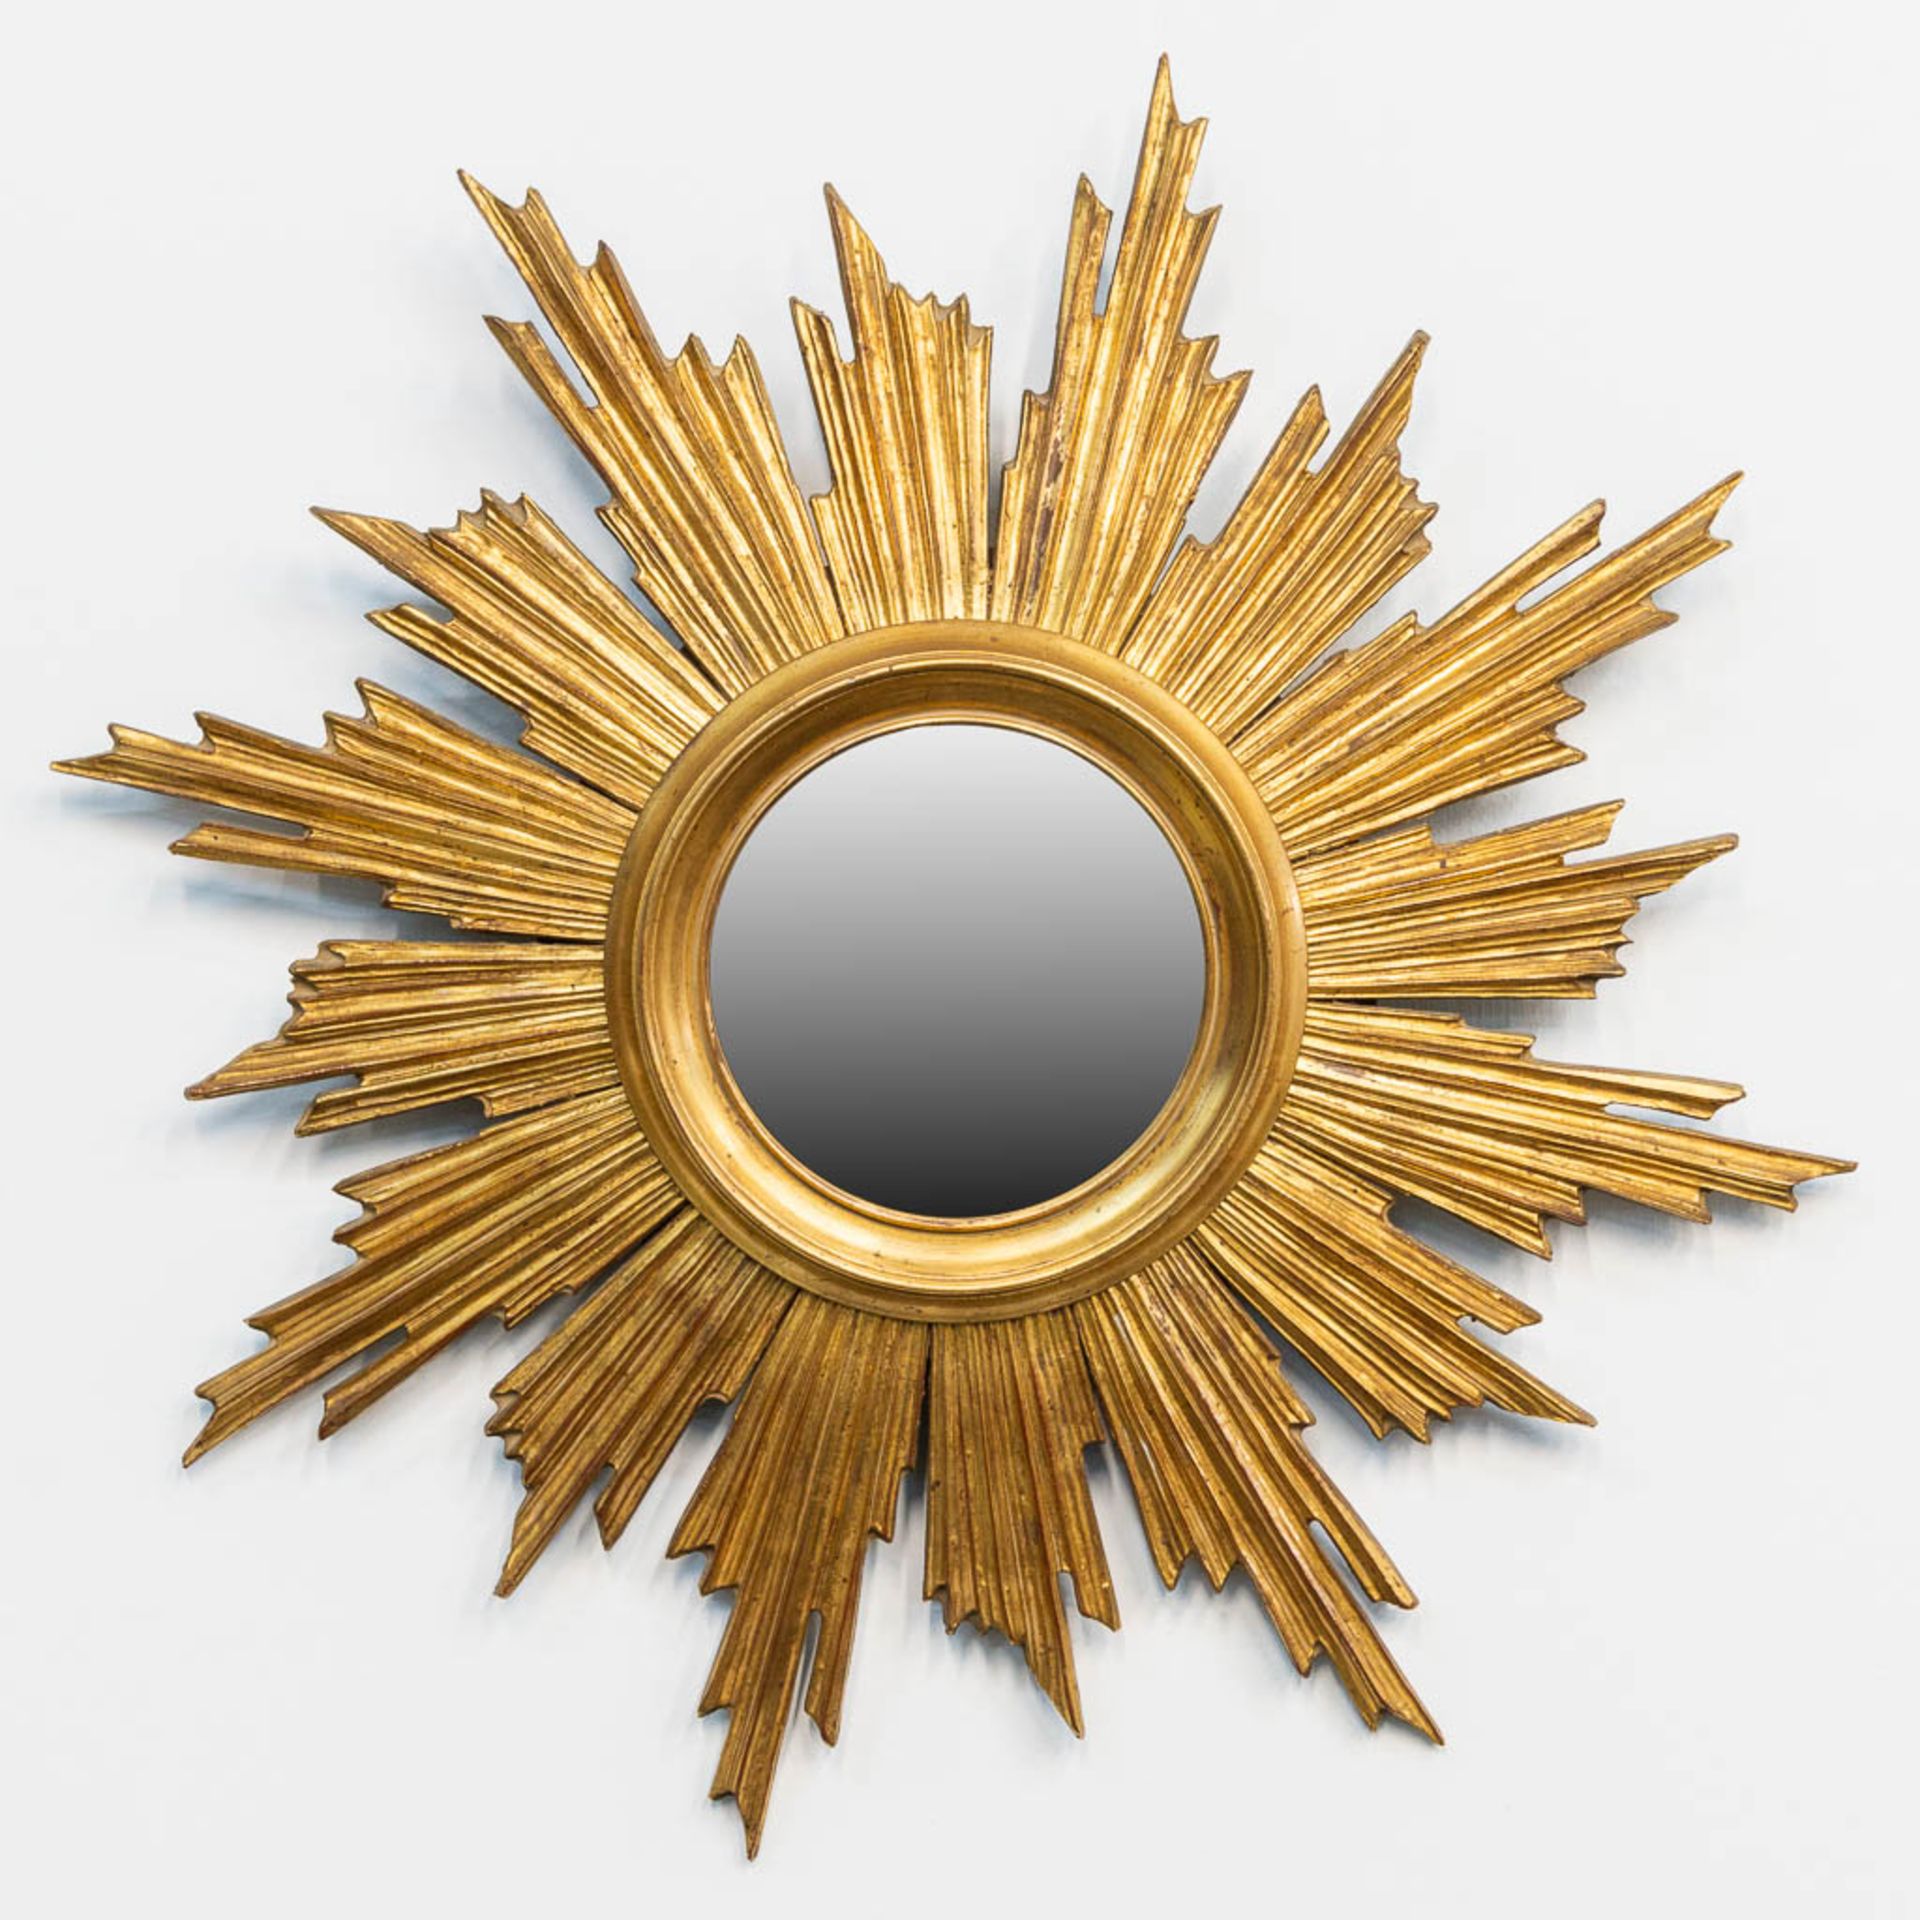 A collection of 2 sunburst mirrors, made of wood, 1960's. - Image 6 of 12